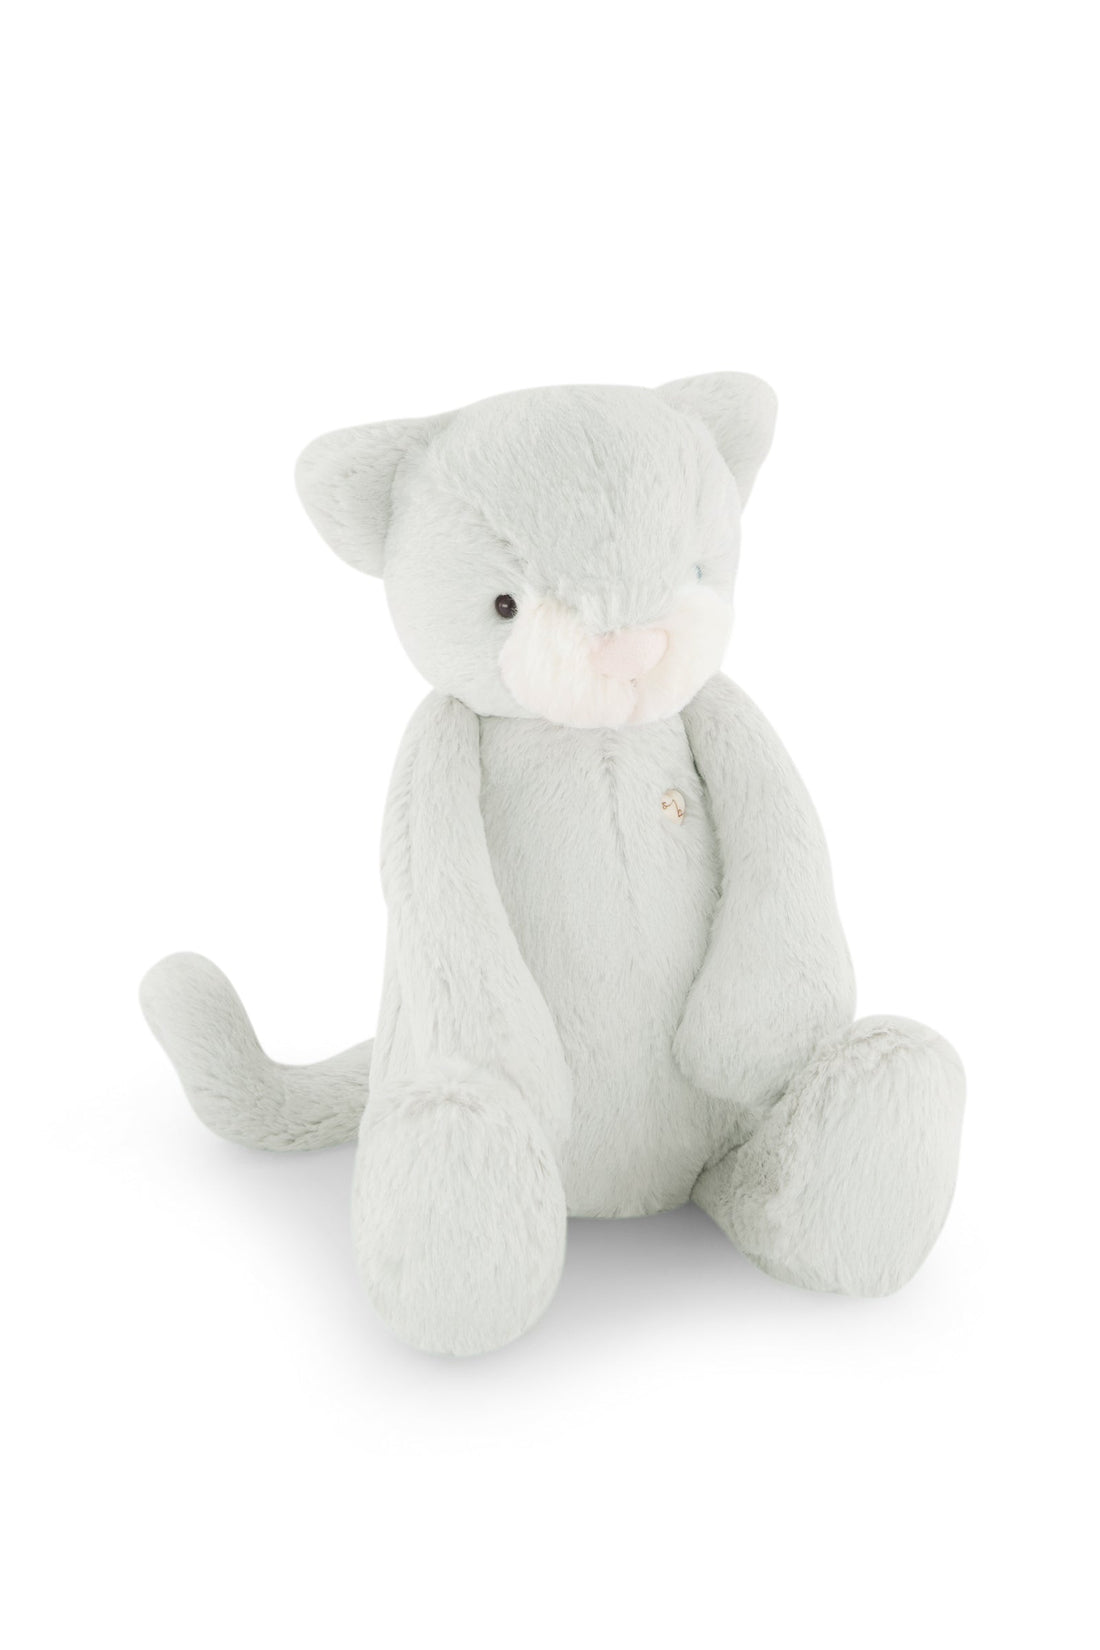 Snuggle Bunnies - Elsie the Kitty - Willow Childrens Toy from Jamie Kay USA